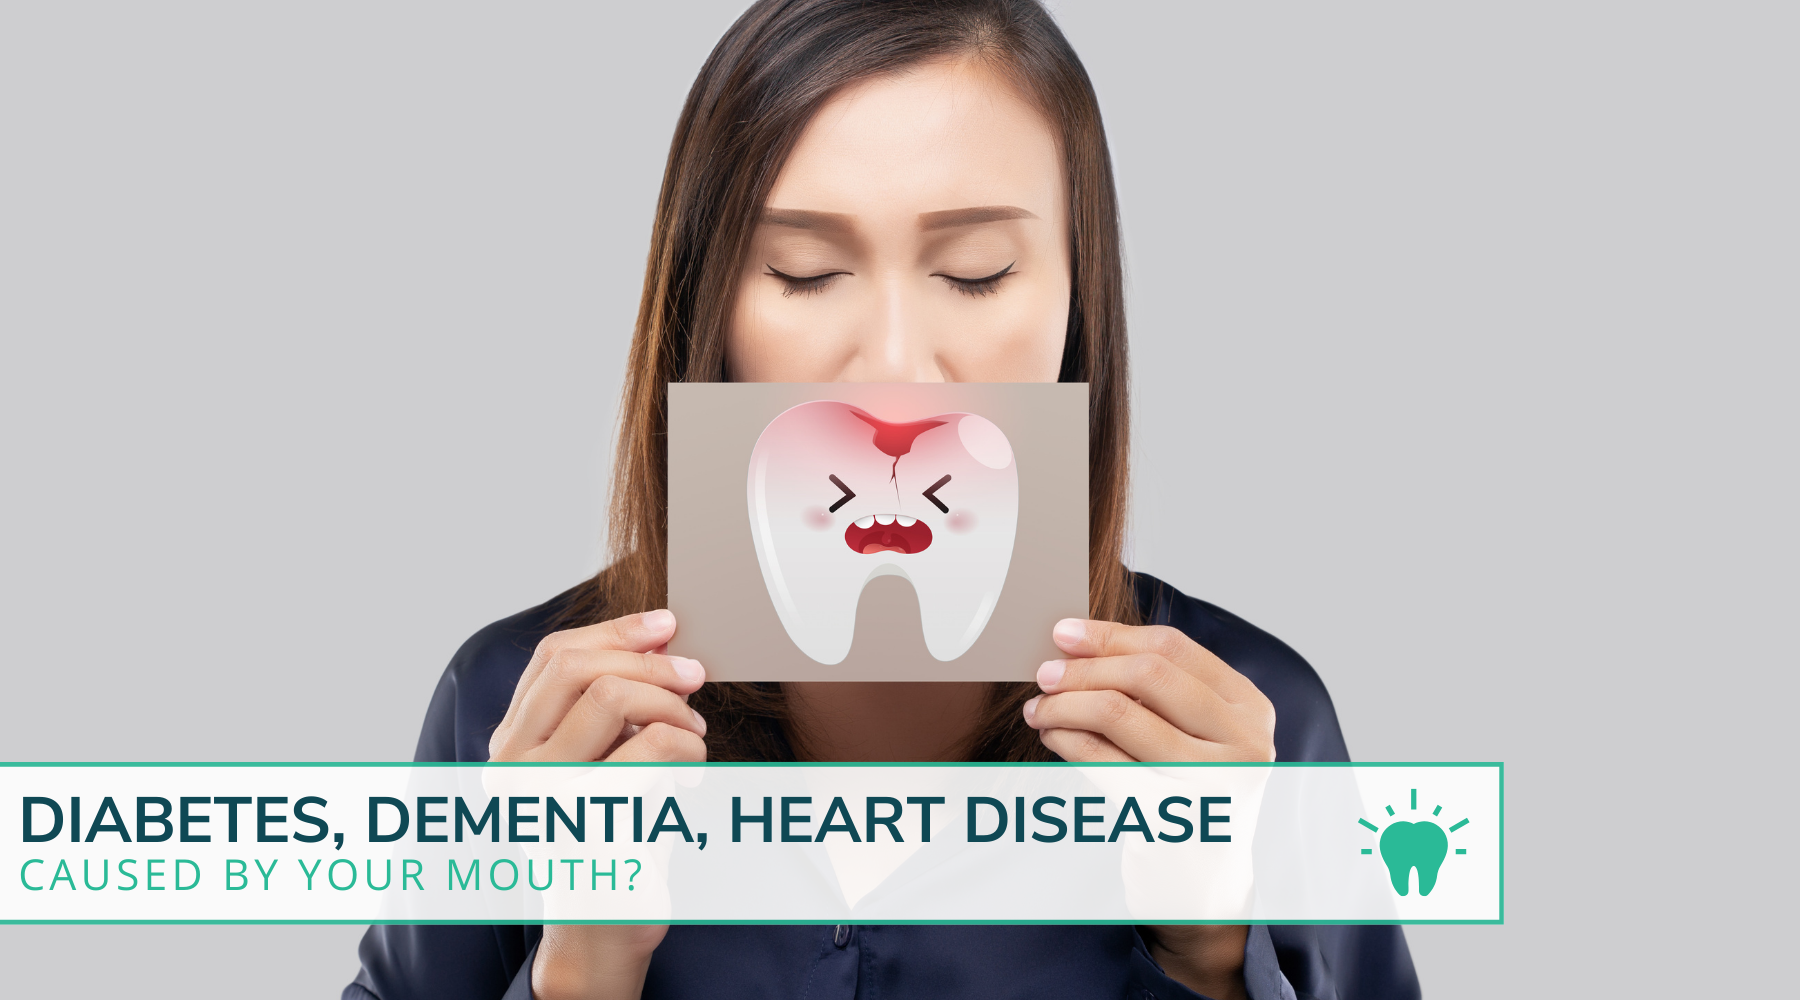 Diabetes, dementia, heart disease…caused by my mouth?